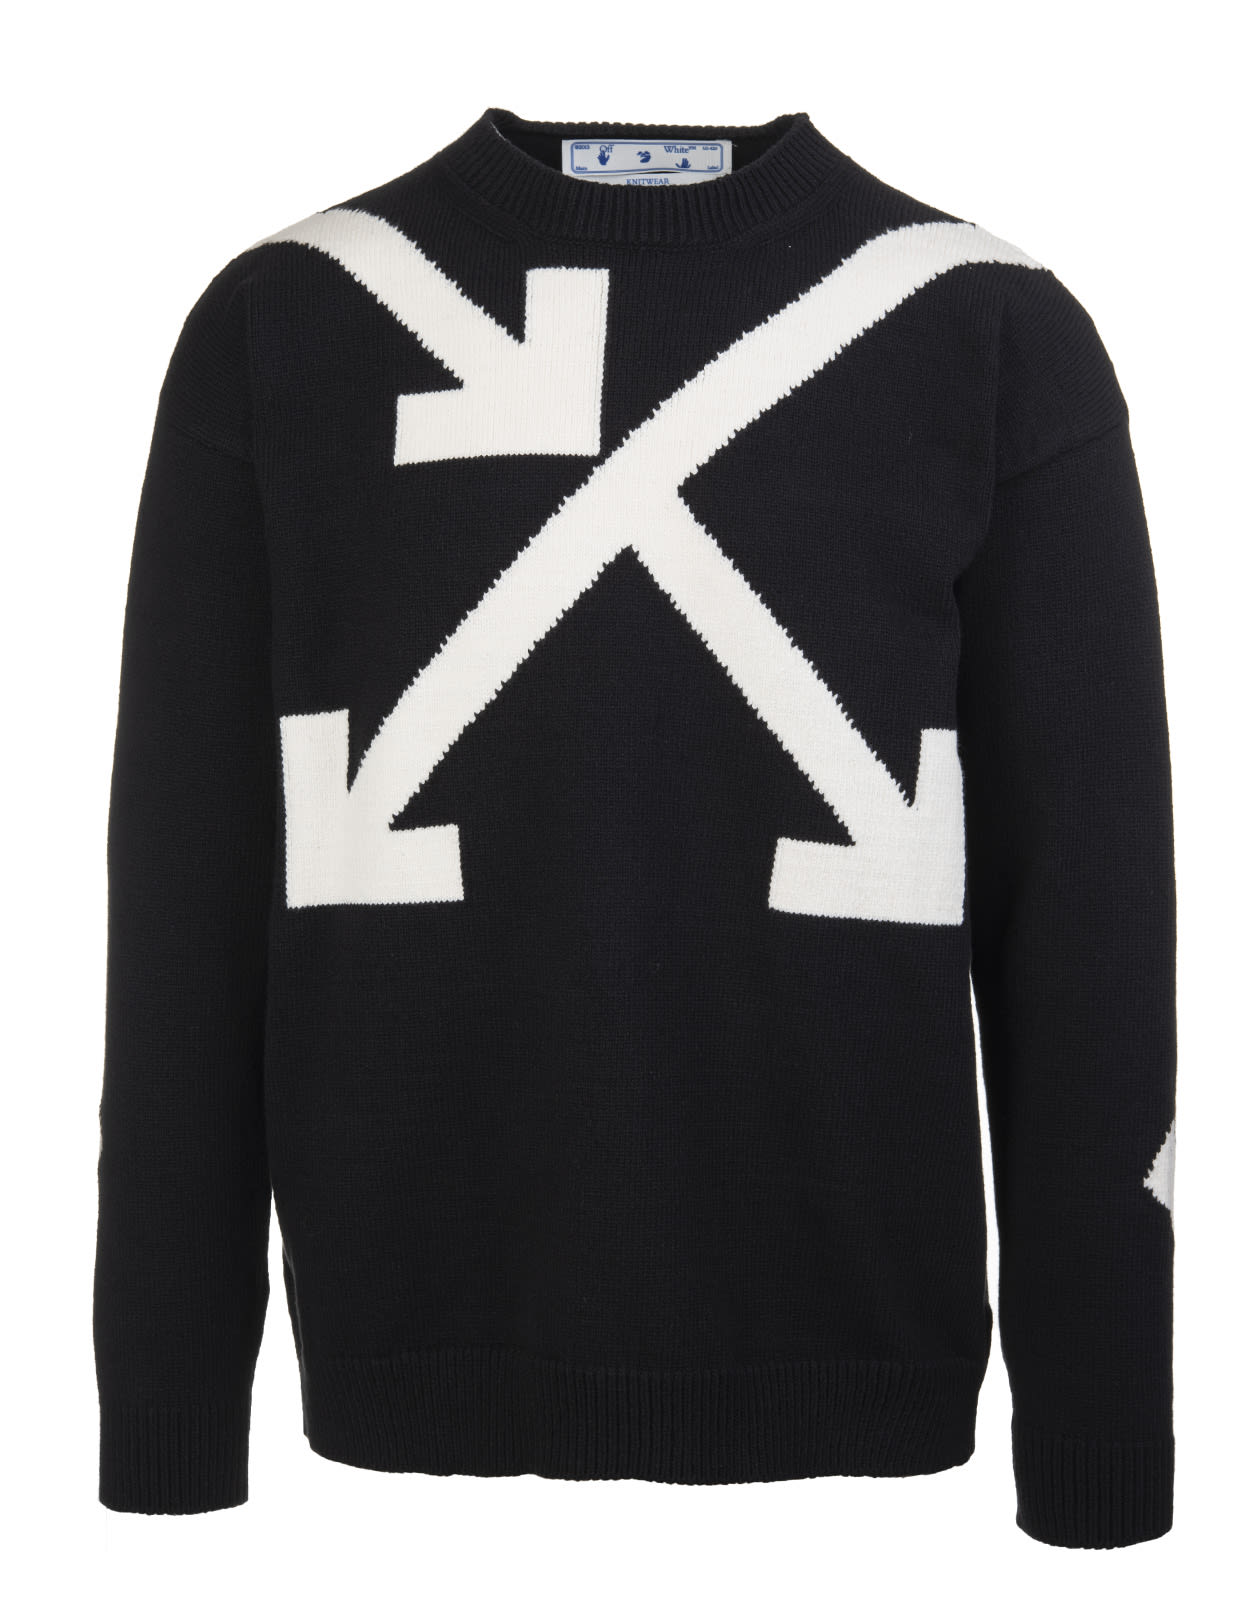 Off-White Man Black Pullover With Intertwined Arrows